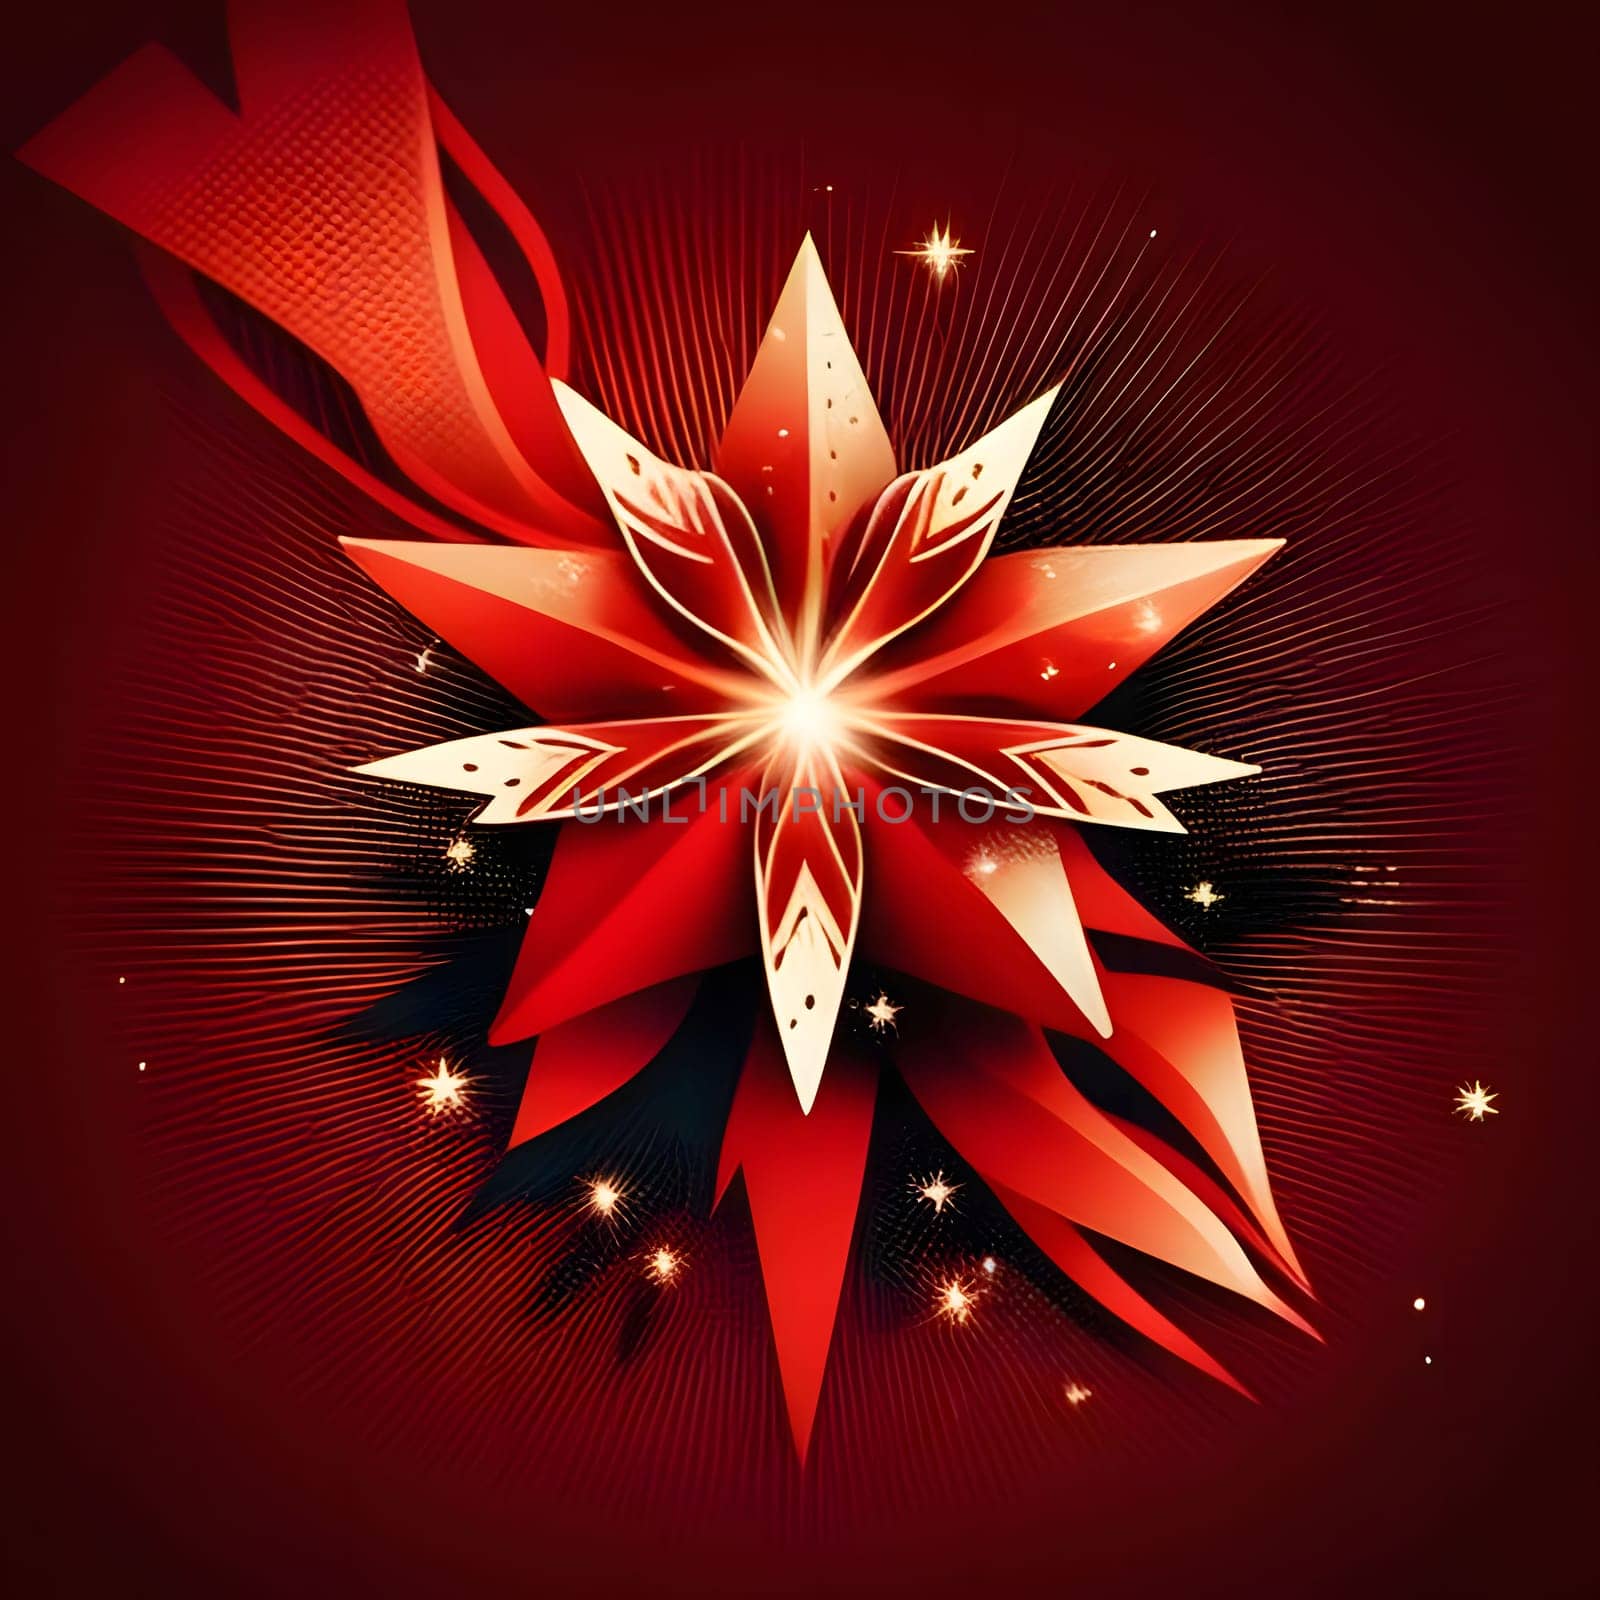 Red star, abstract. The Christmas star as a symbol of the birth of the savior. by ThemesS